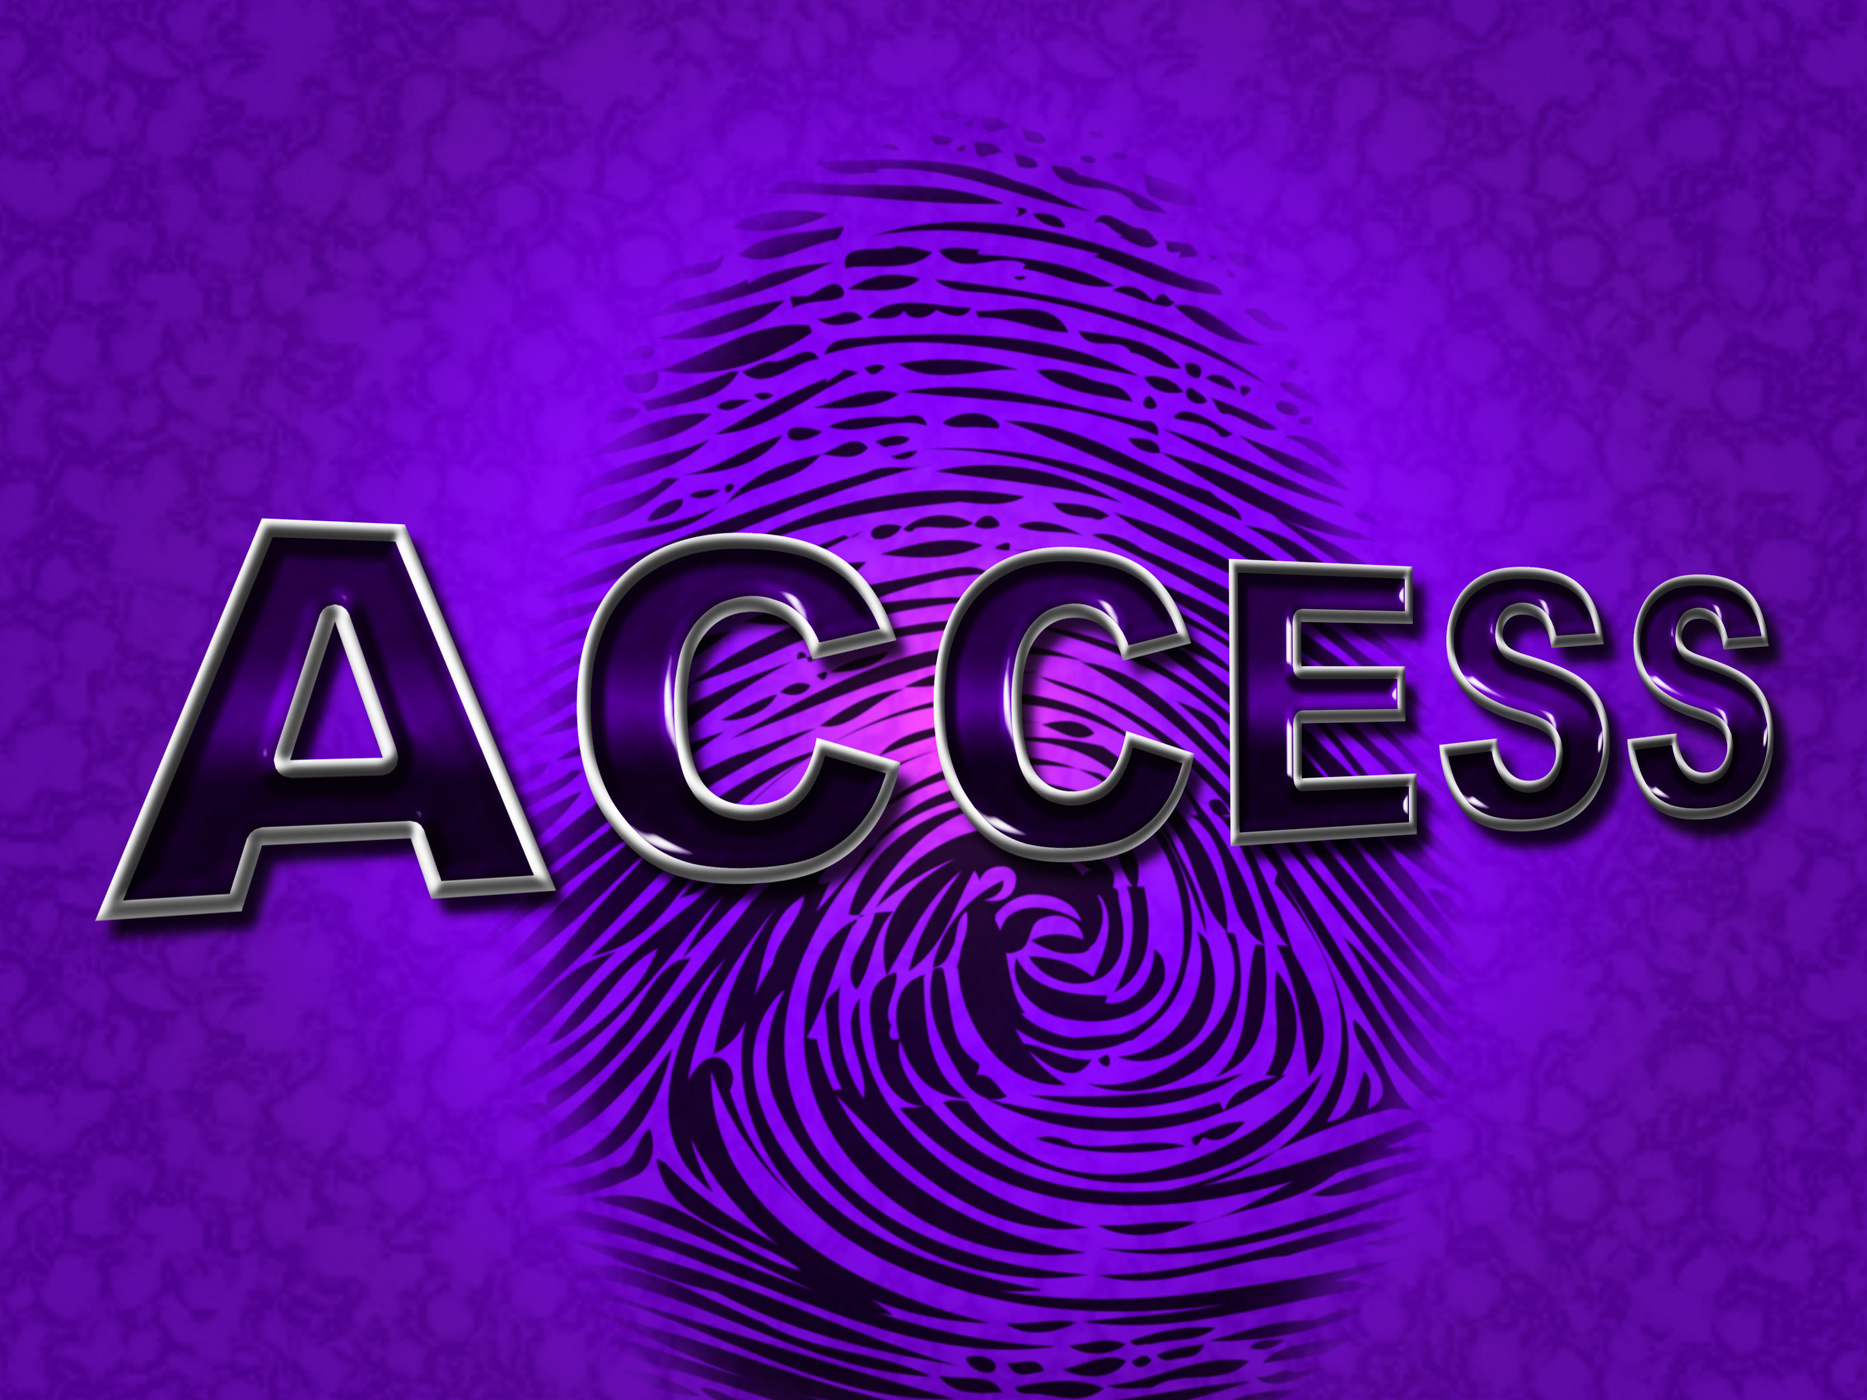 Access Security Indicates Forbidden Accessible And Entrance, Access, Password, Security, Secured, HQ Photo